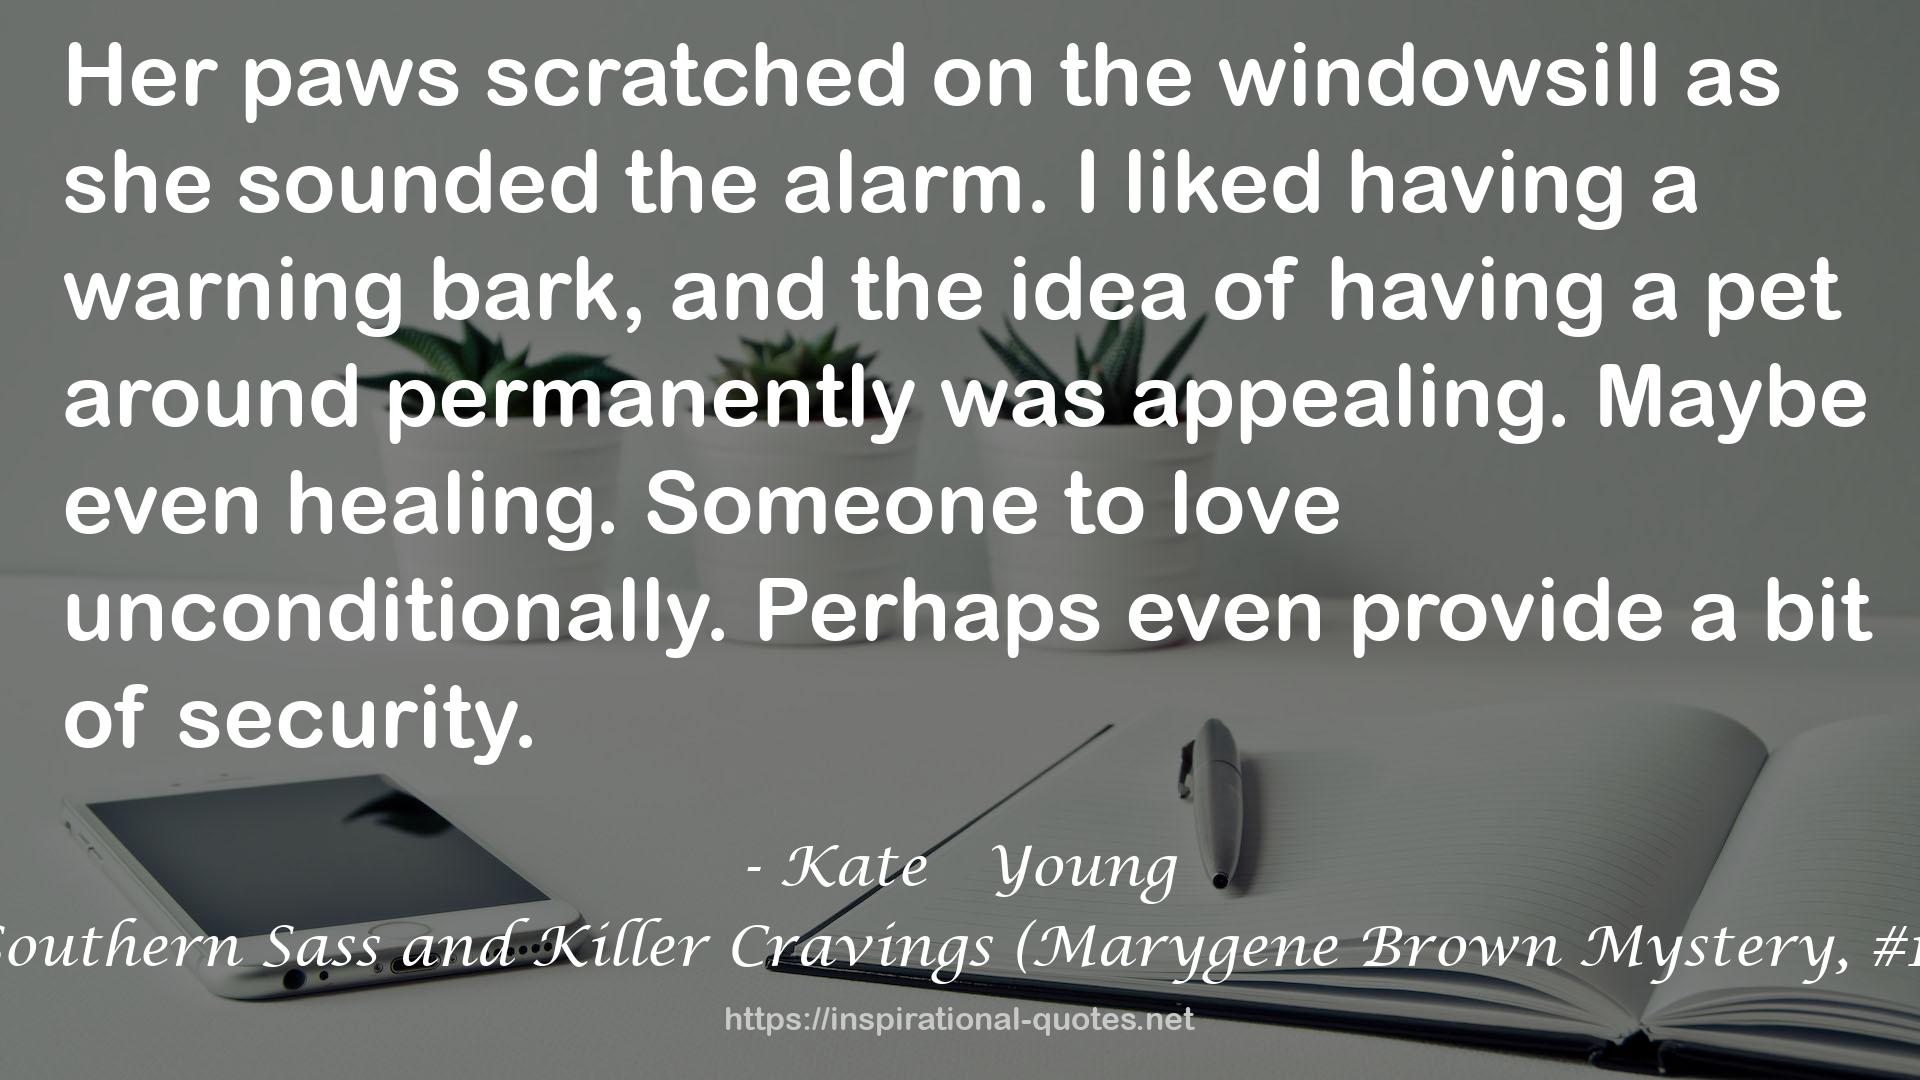 Southern Sass and Killer Cravings (Marygene Brown Mystery, #1) QUOTES